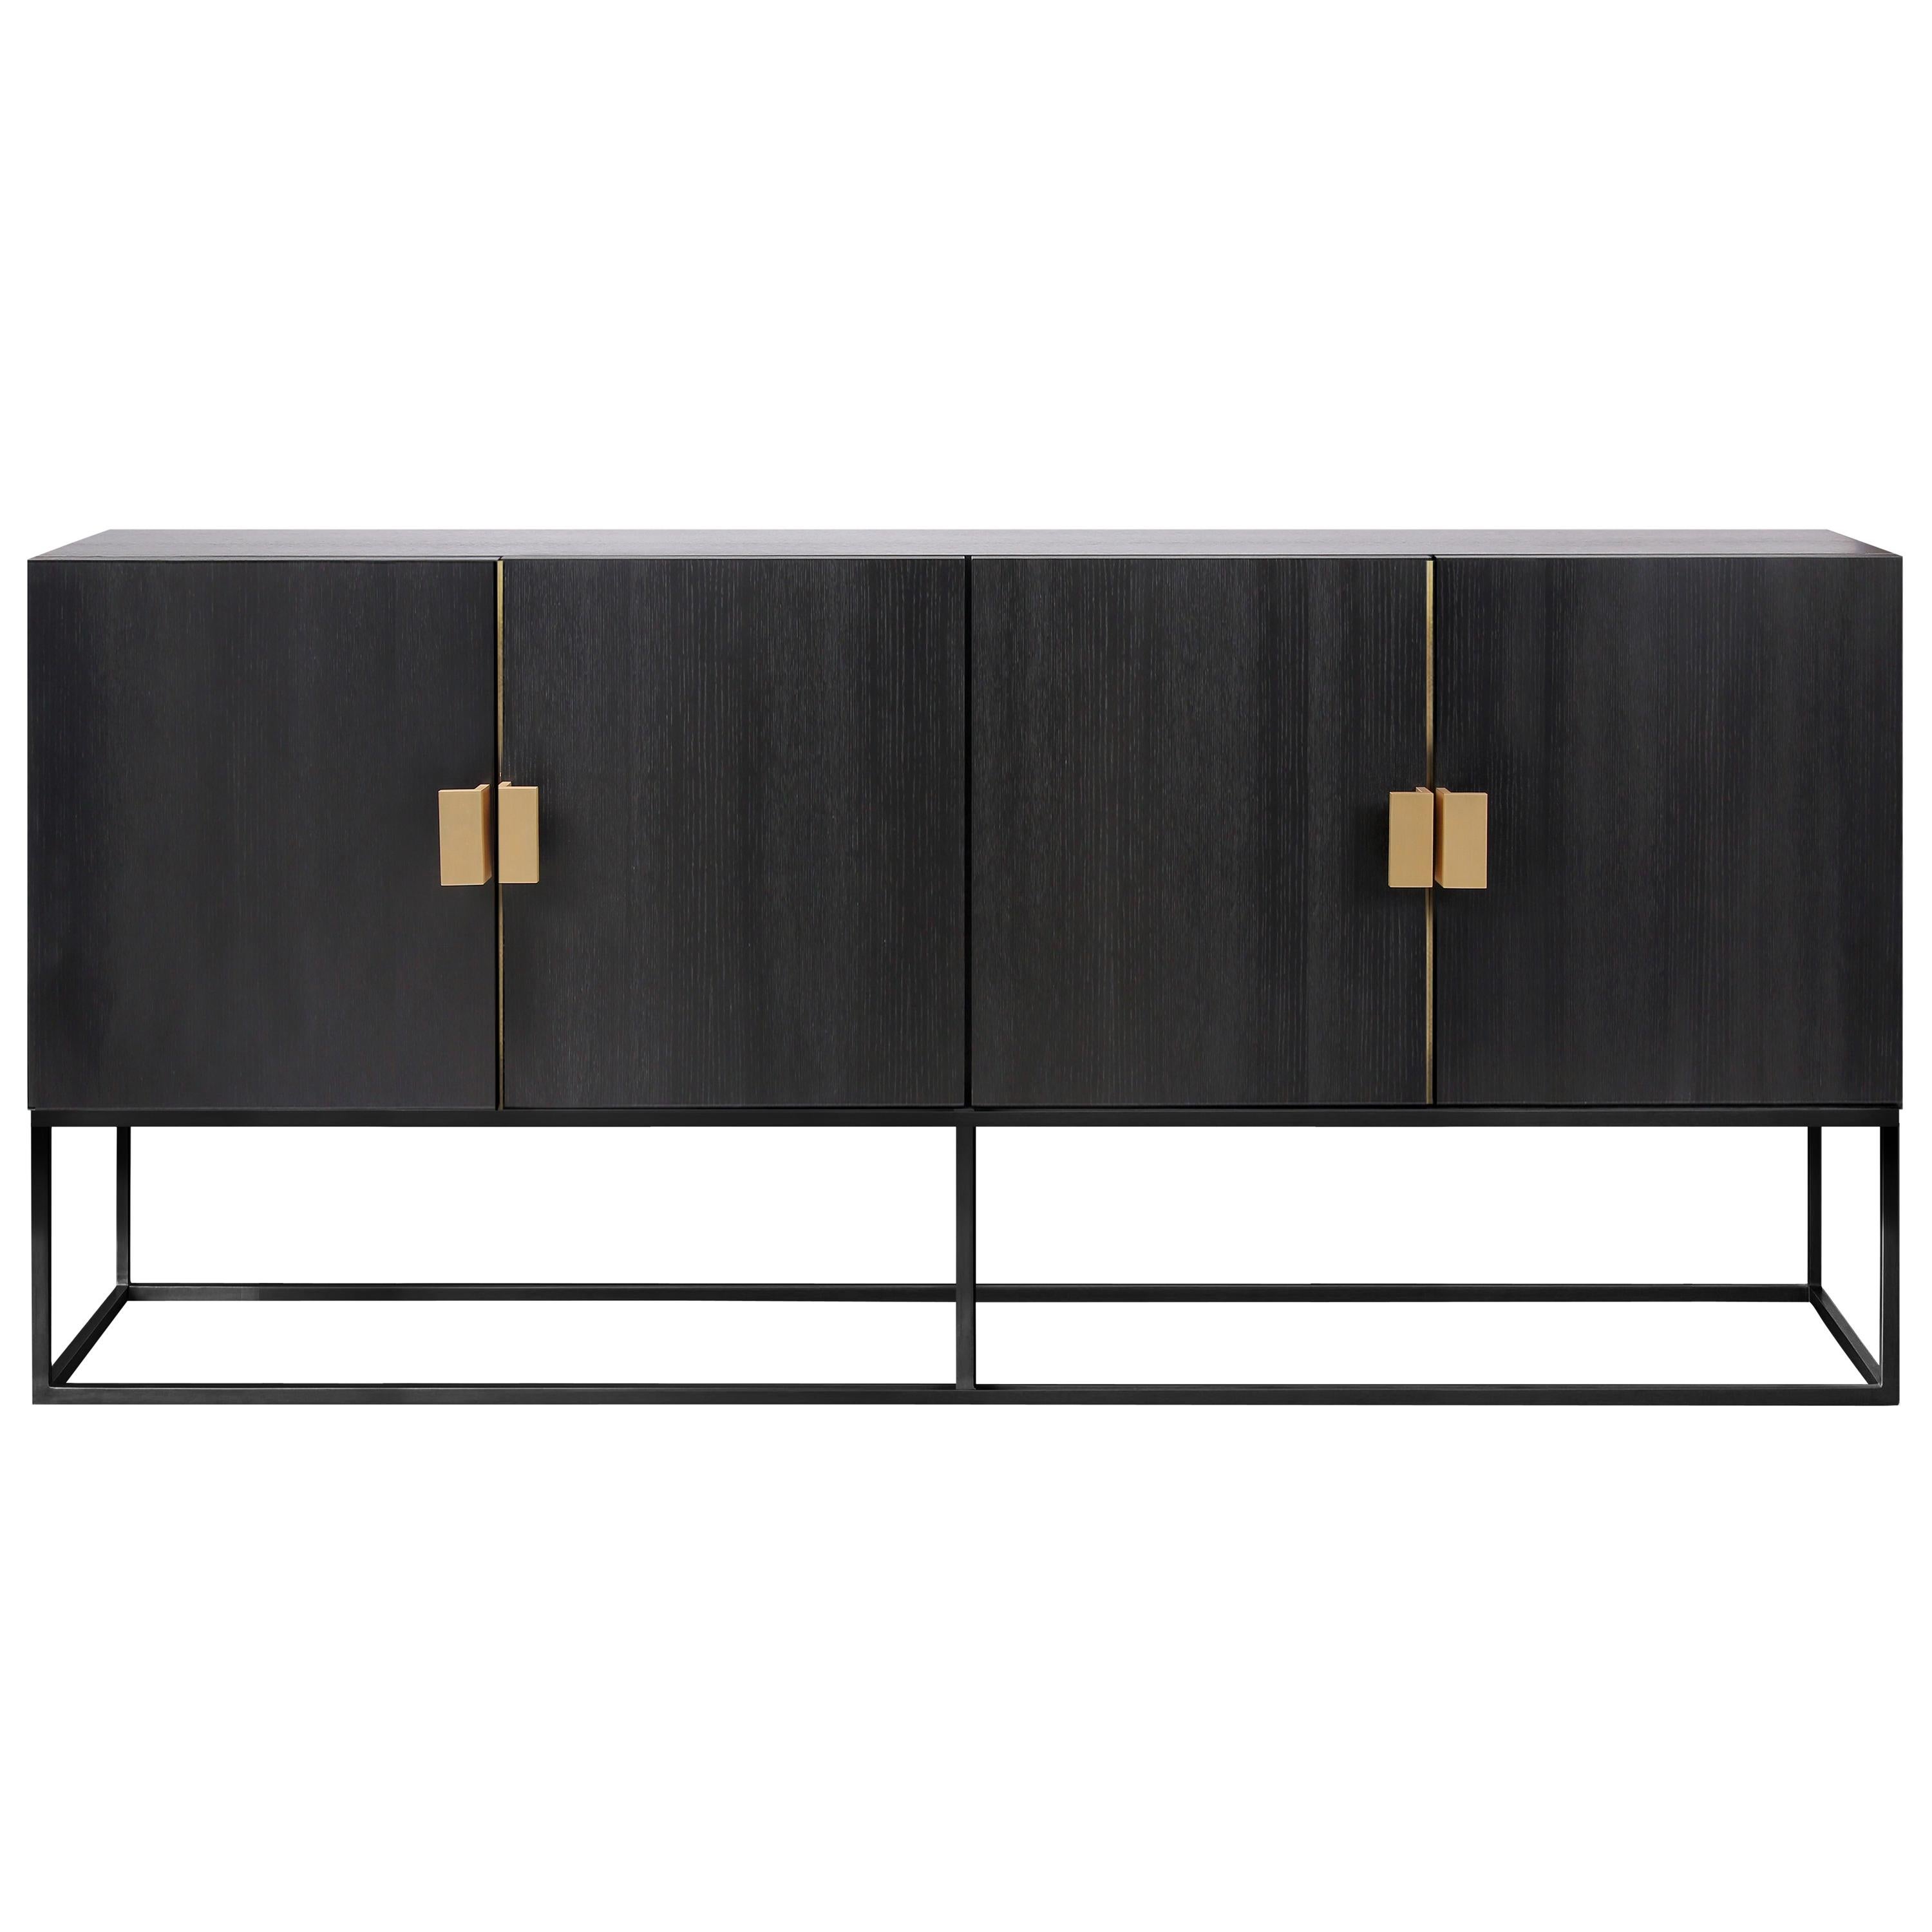 Contemporary Norse Sideboard in Black Ash, Brass, by Railis Design